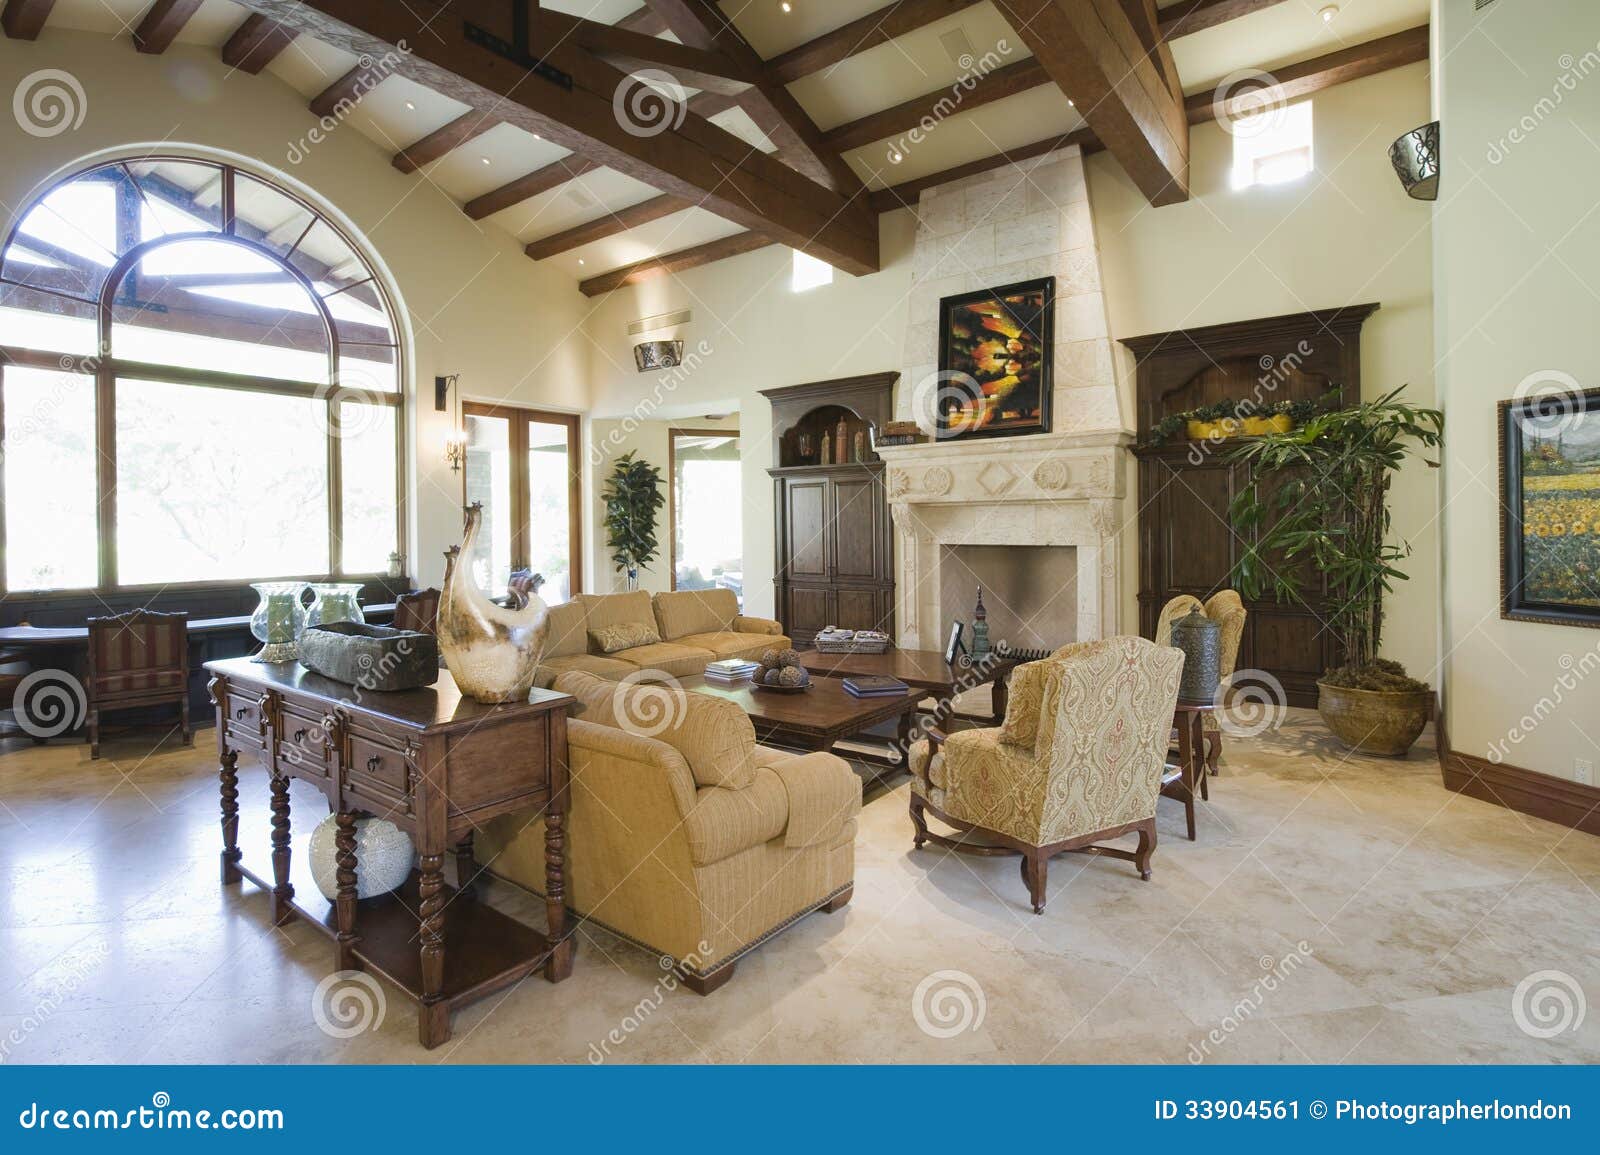 Spacious Living Room With Beamed Ceiling Stock Image Image Of